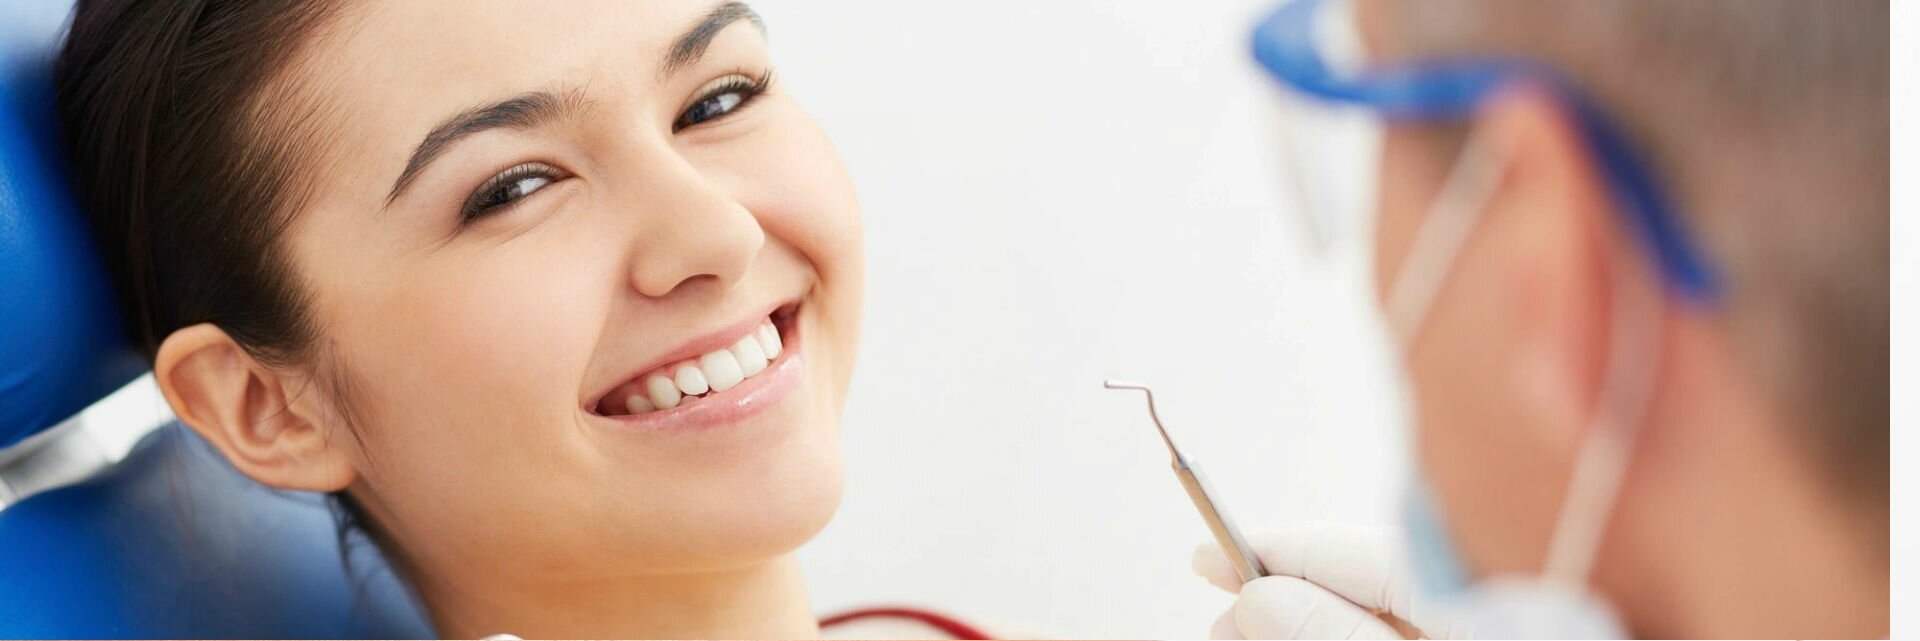 Dentist Niddrie Has The Experience And Qualification For Perfect Treatment